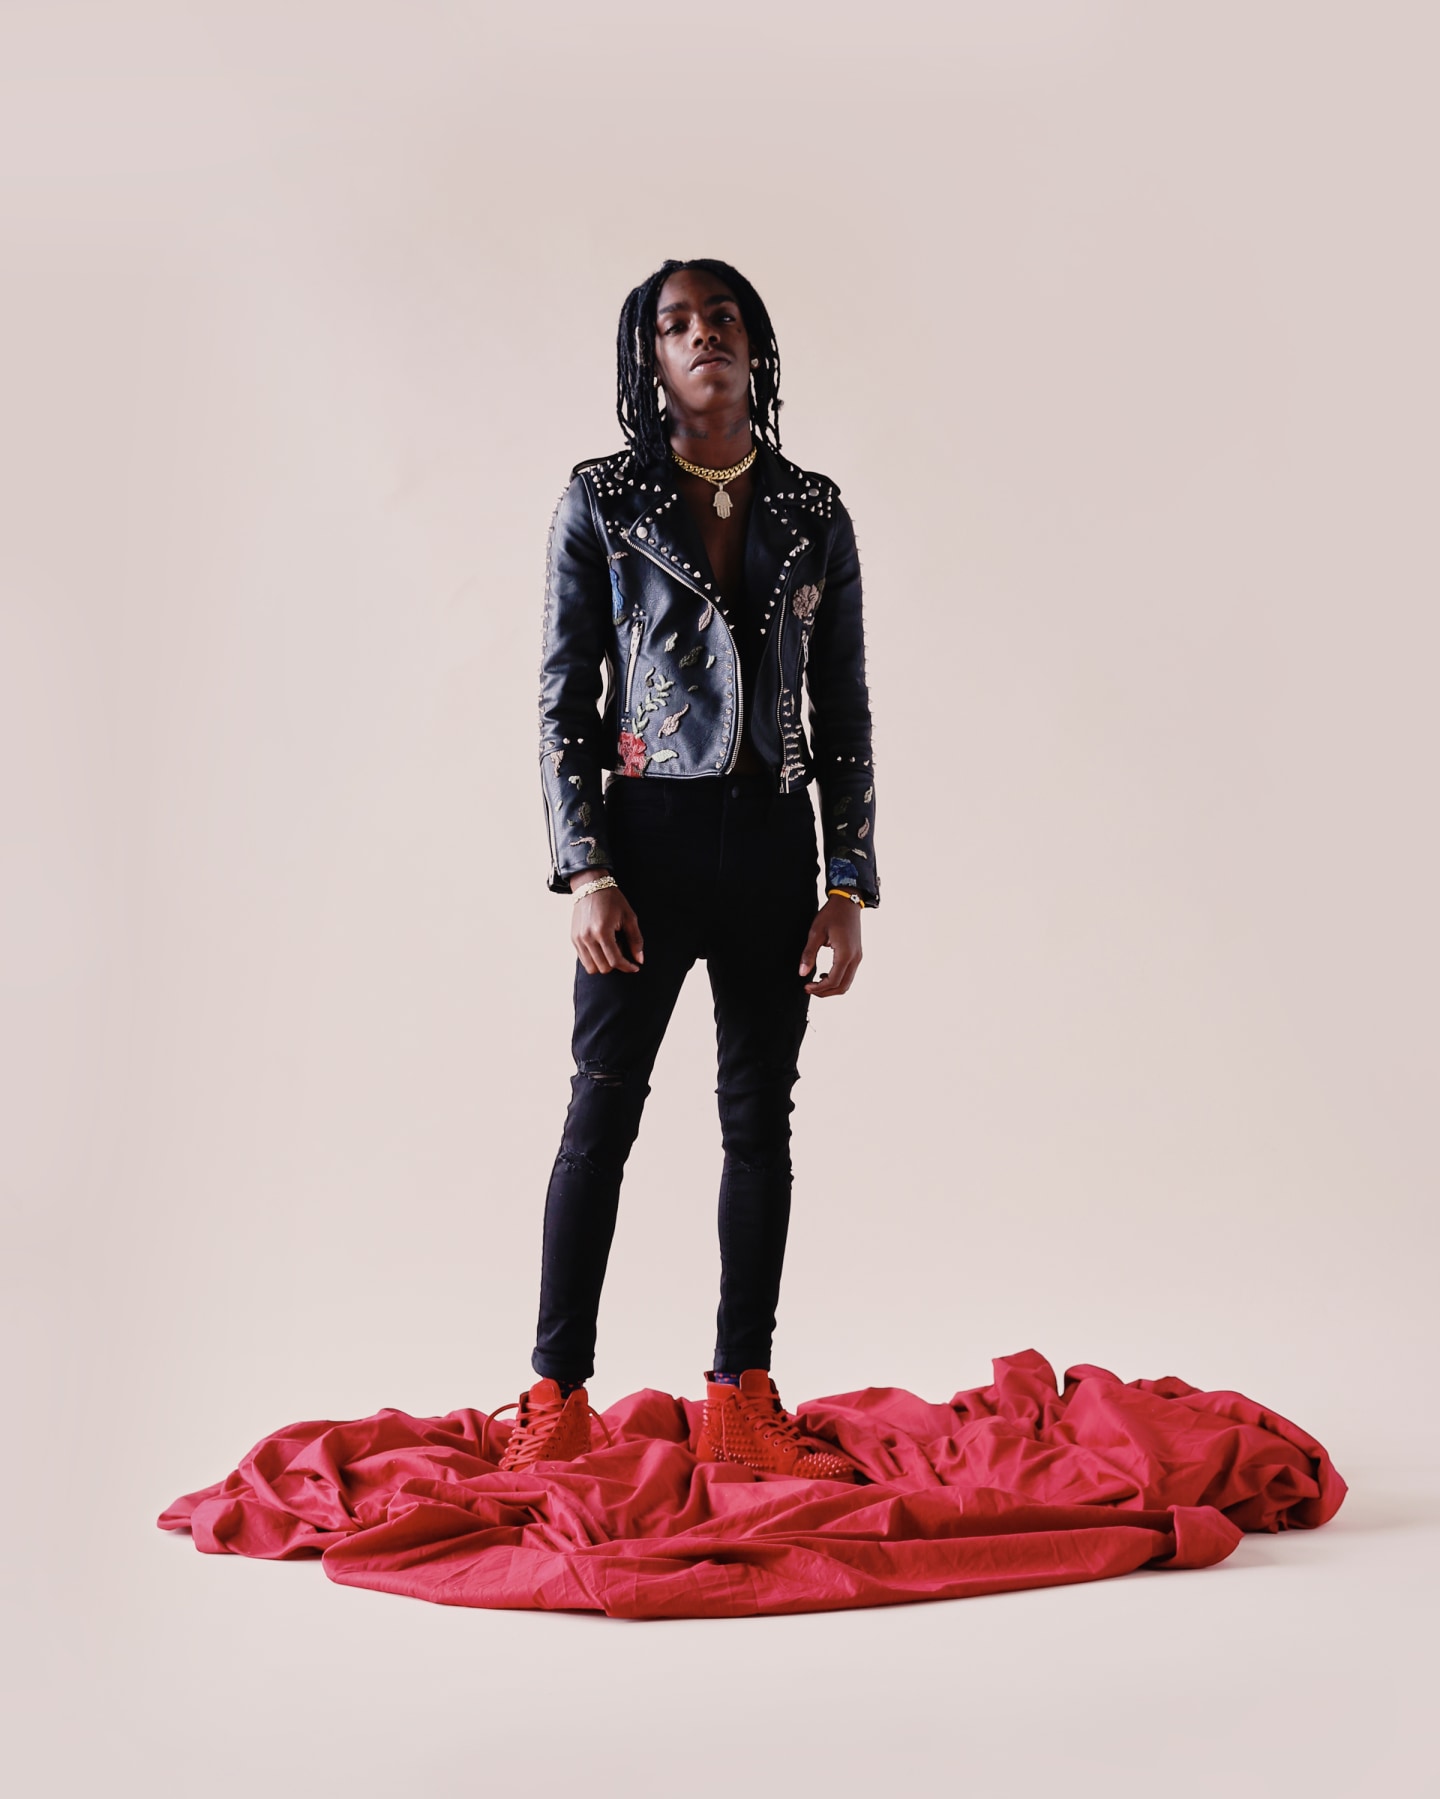 How Ynw Melly Turned His Pain Into Beautiful Rap Ballads The Fader